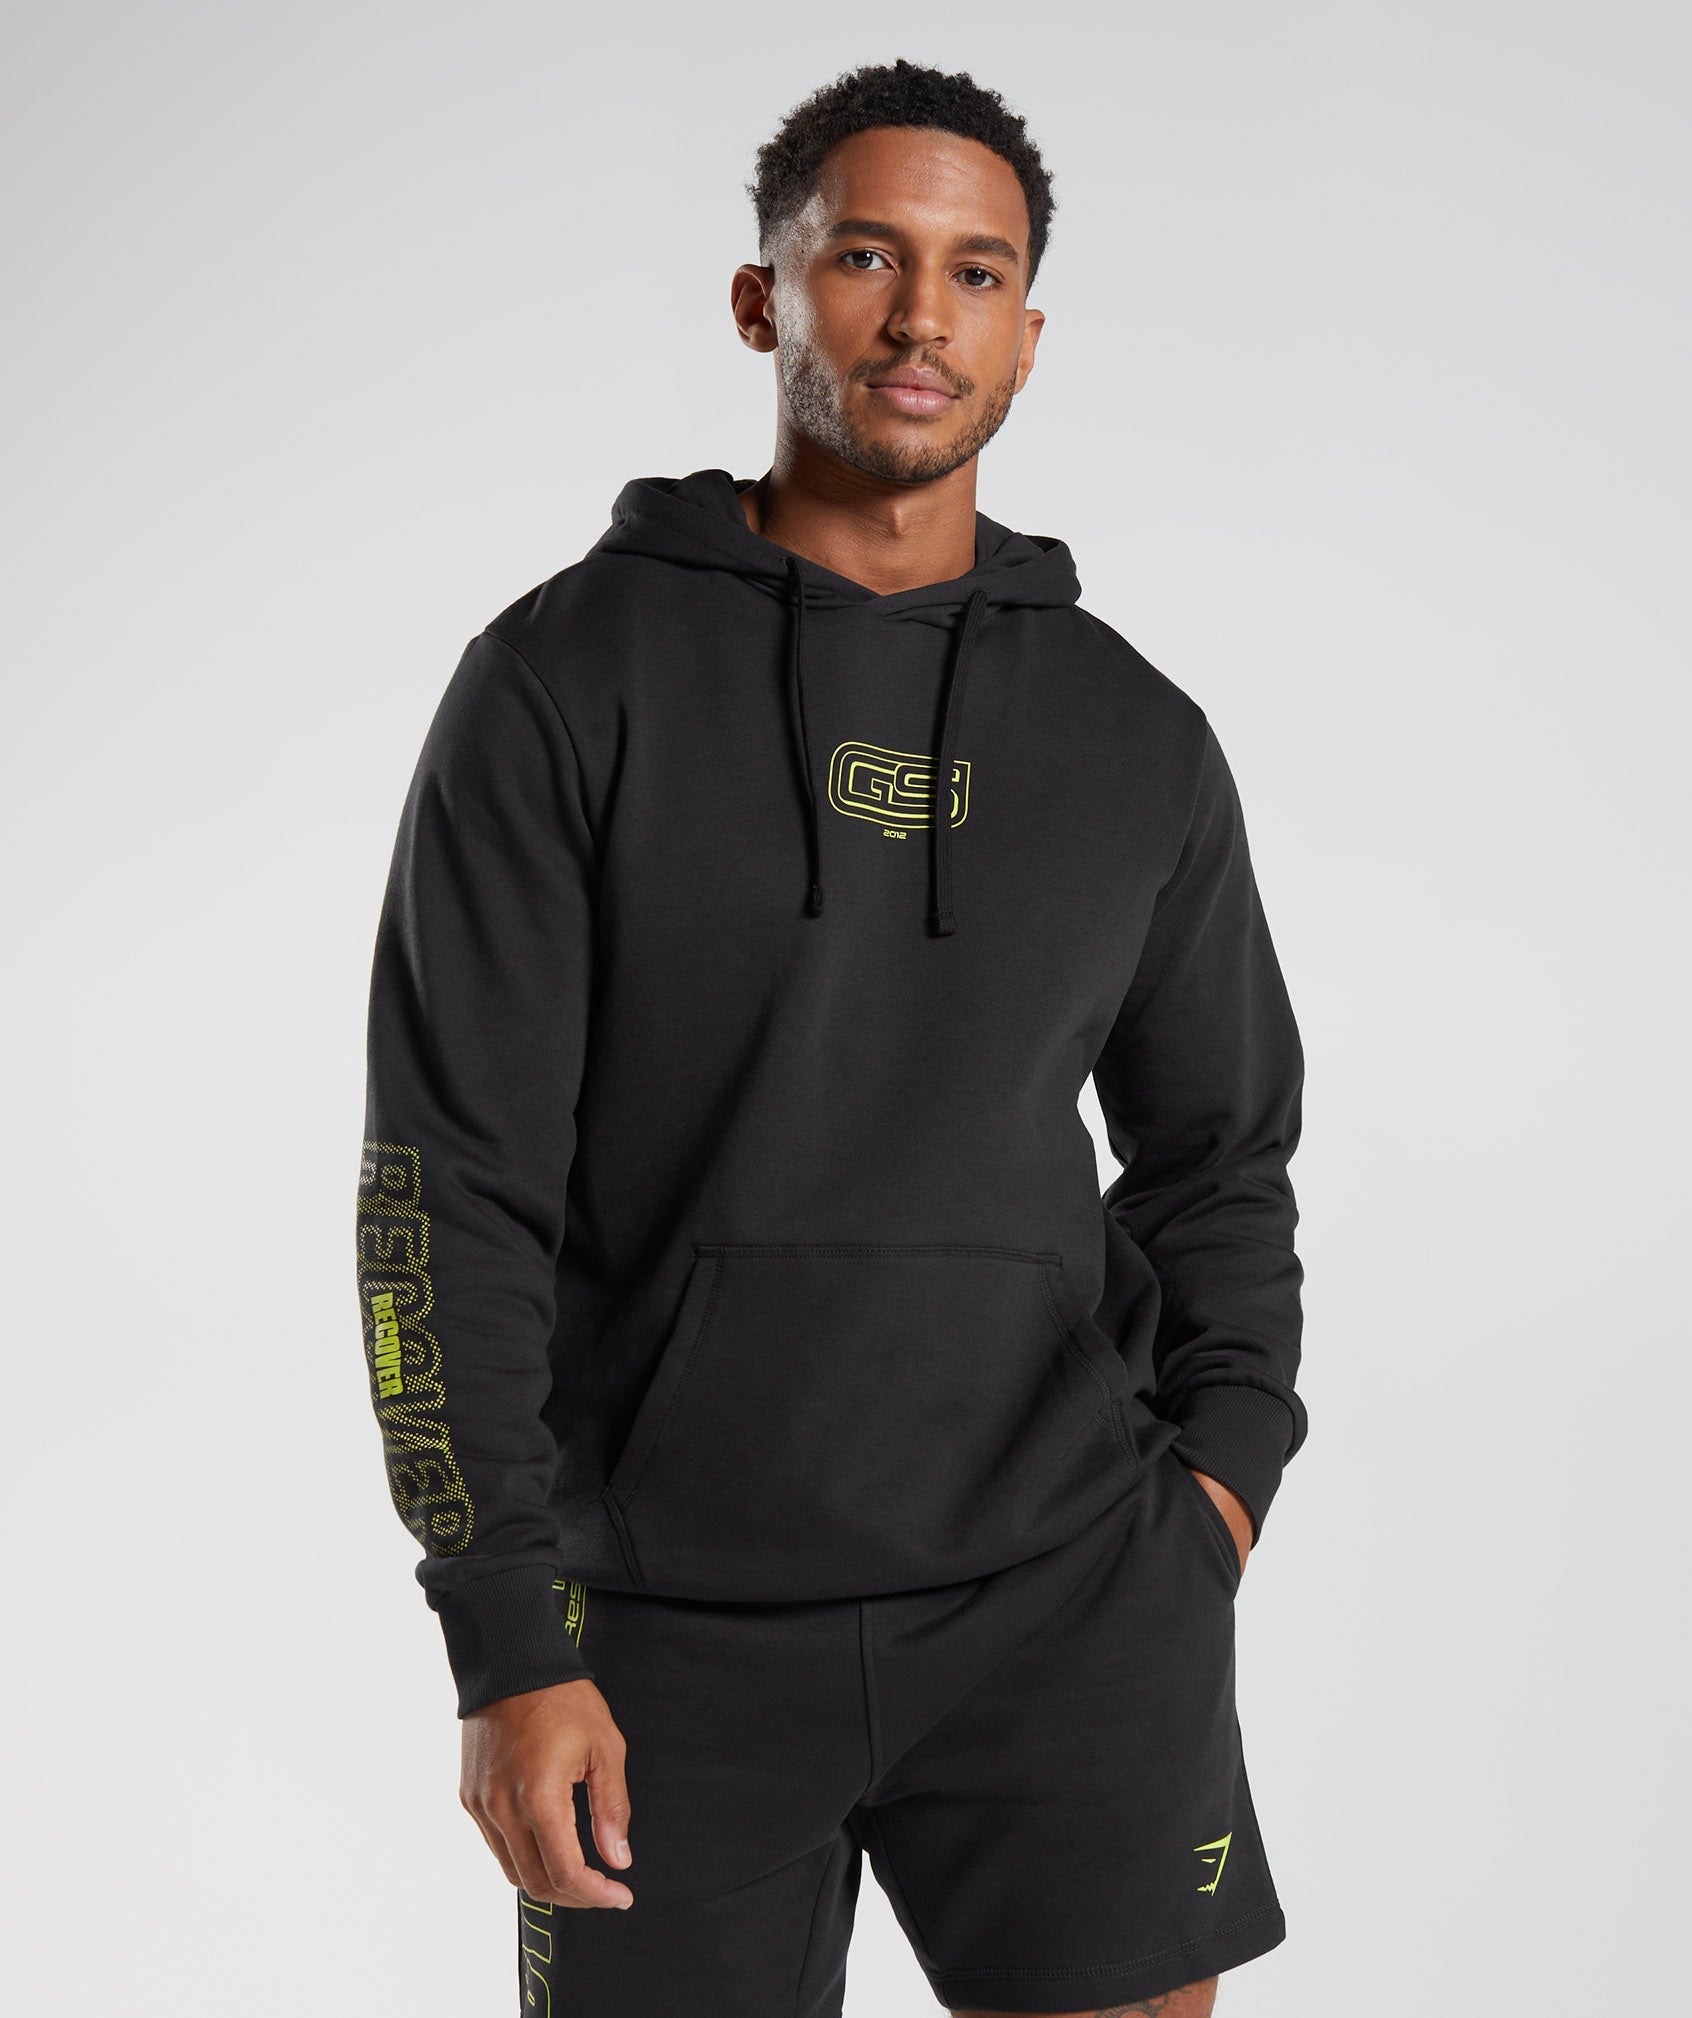 Recovery Graphic Hoodie in Black - view 1